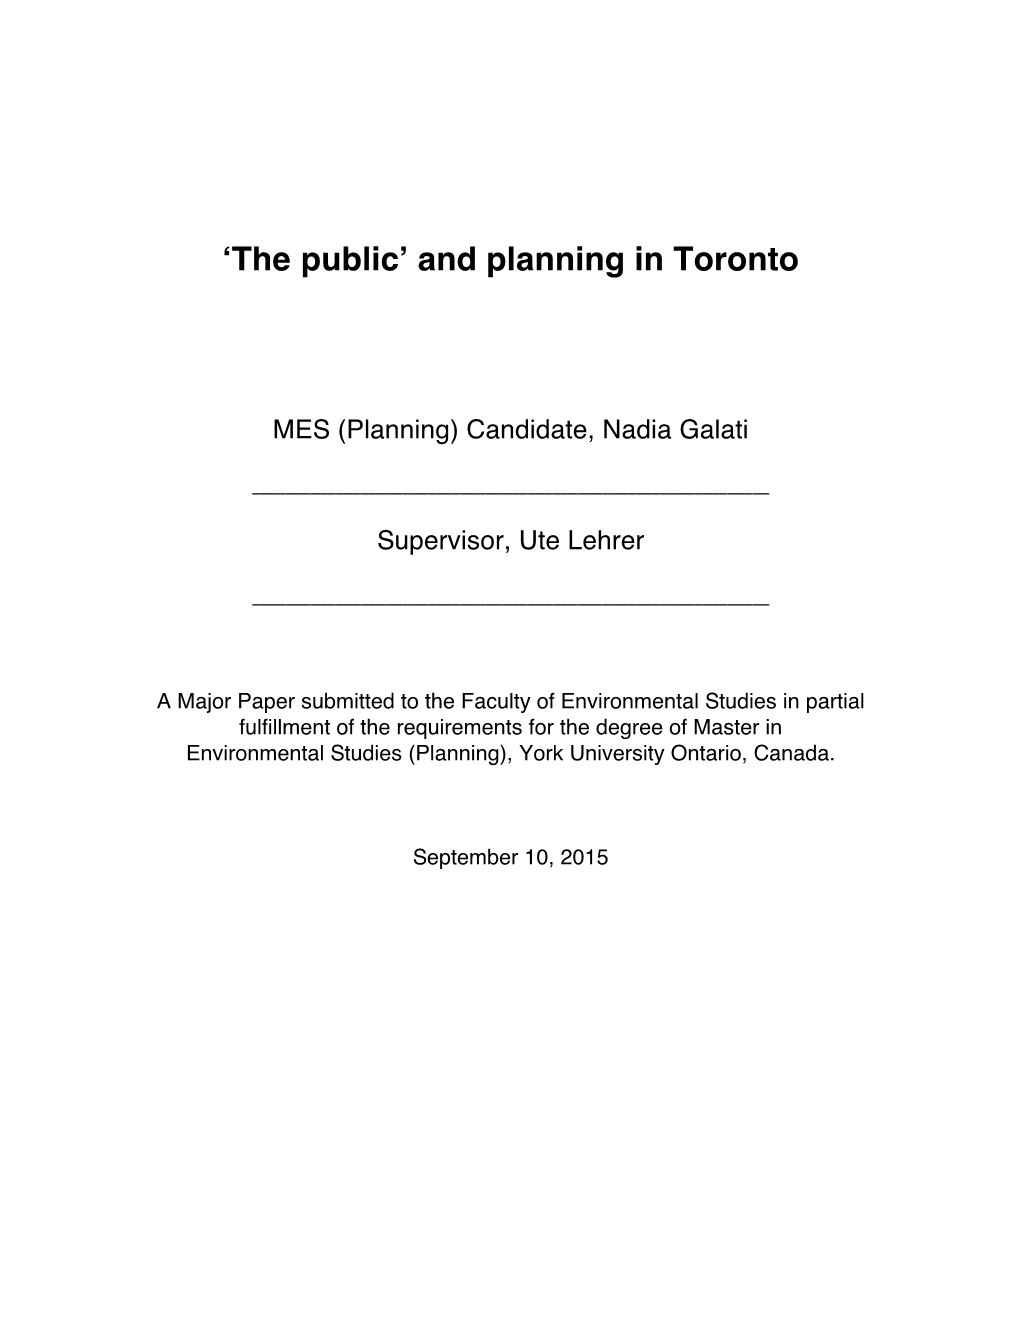 ʻthe Publicʼ and Planning in Toronto